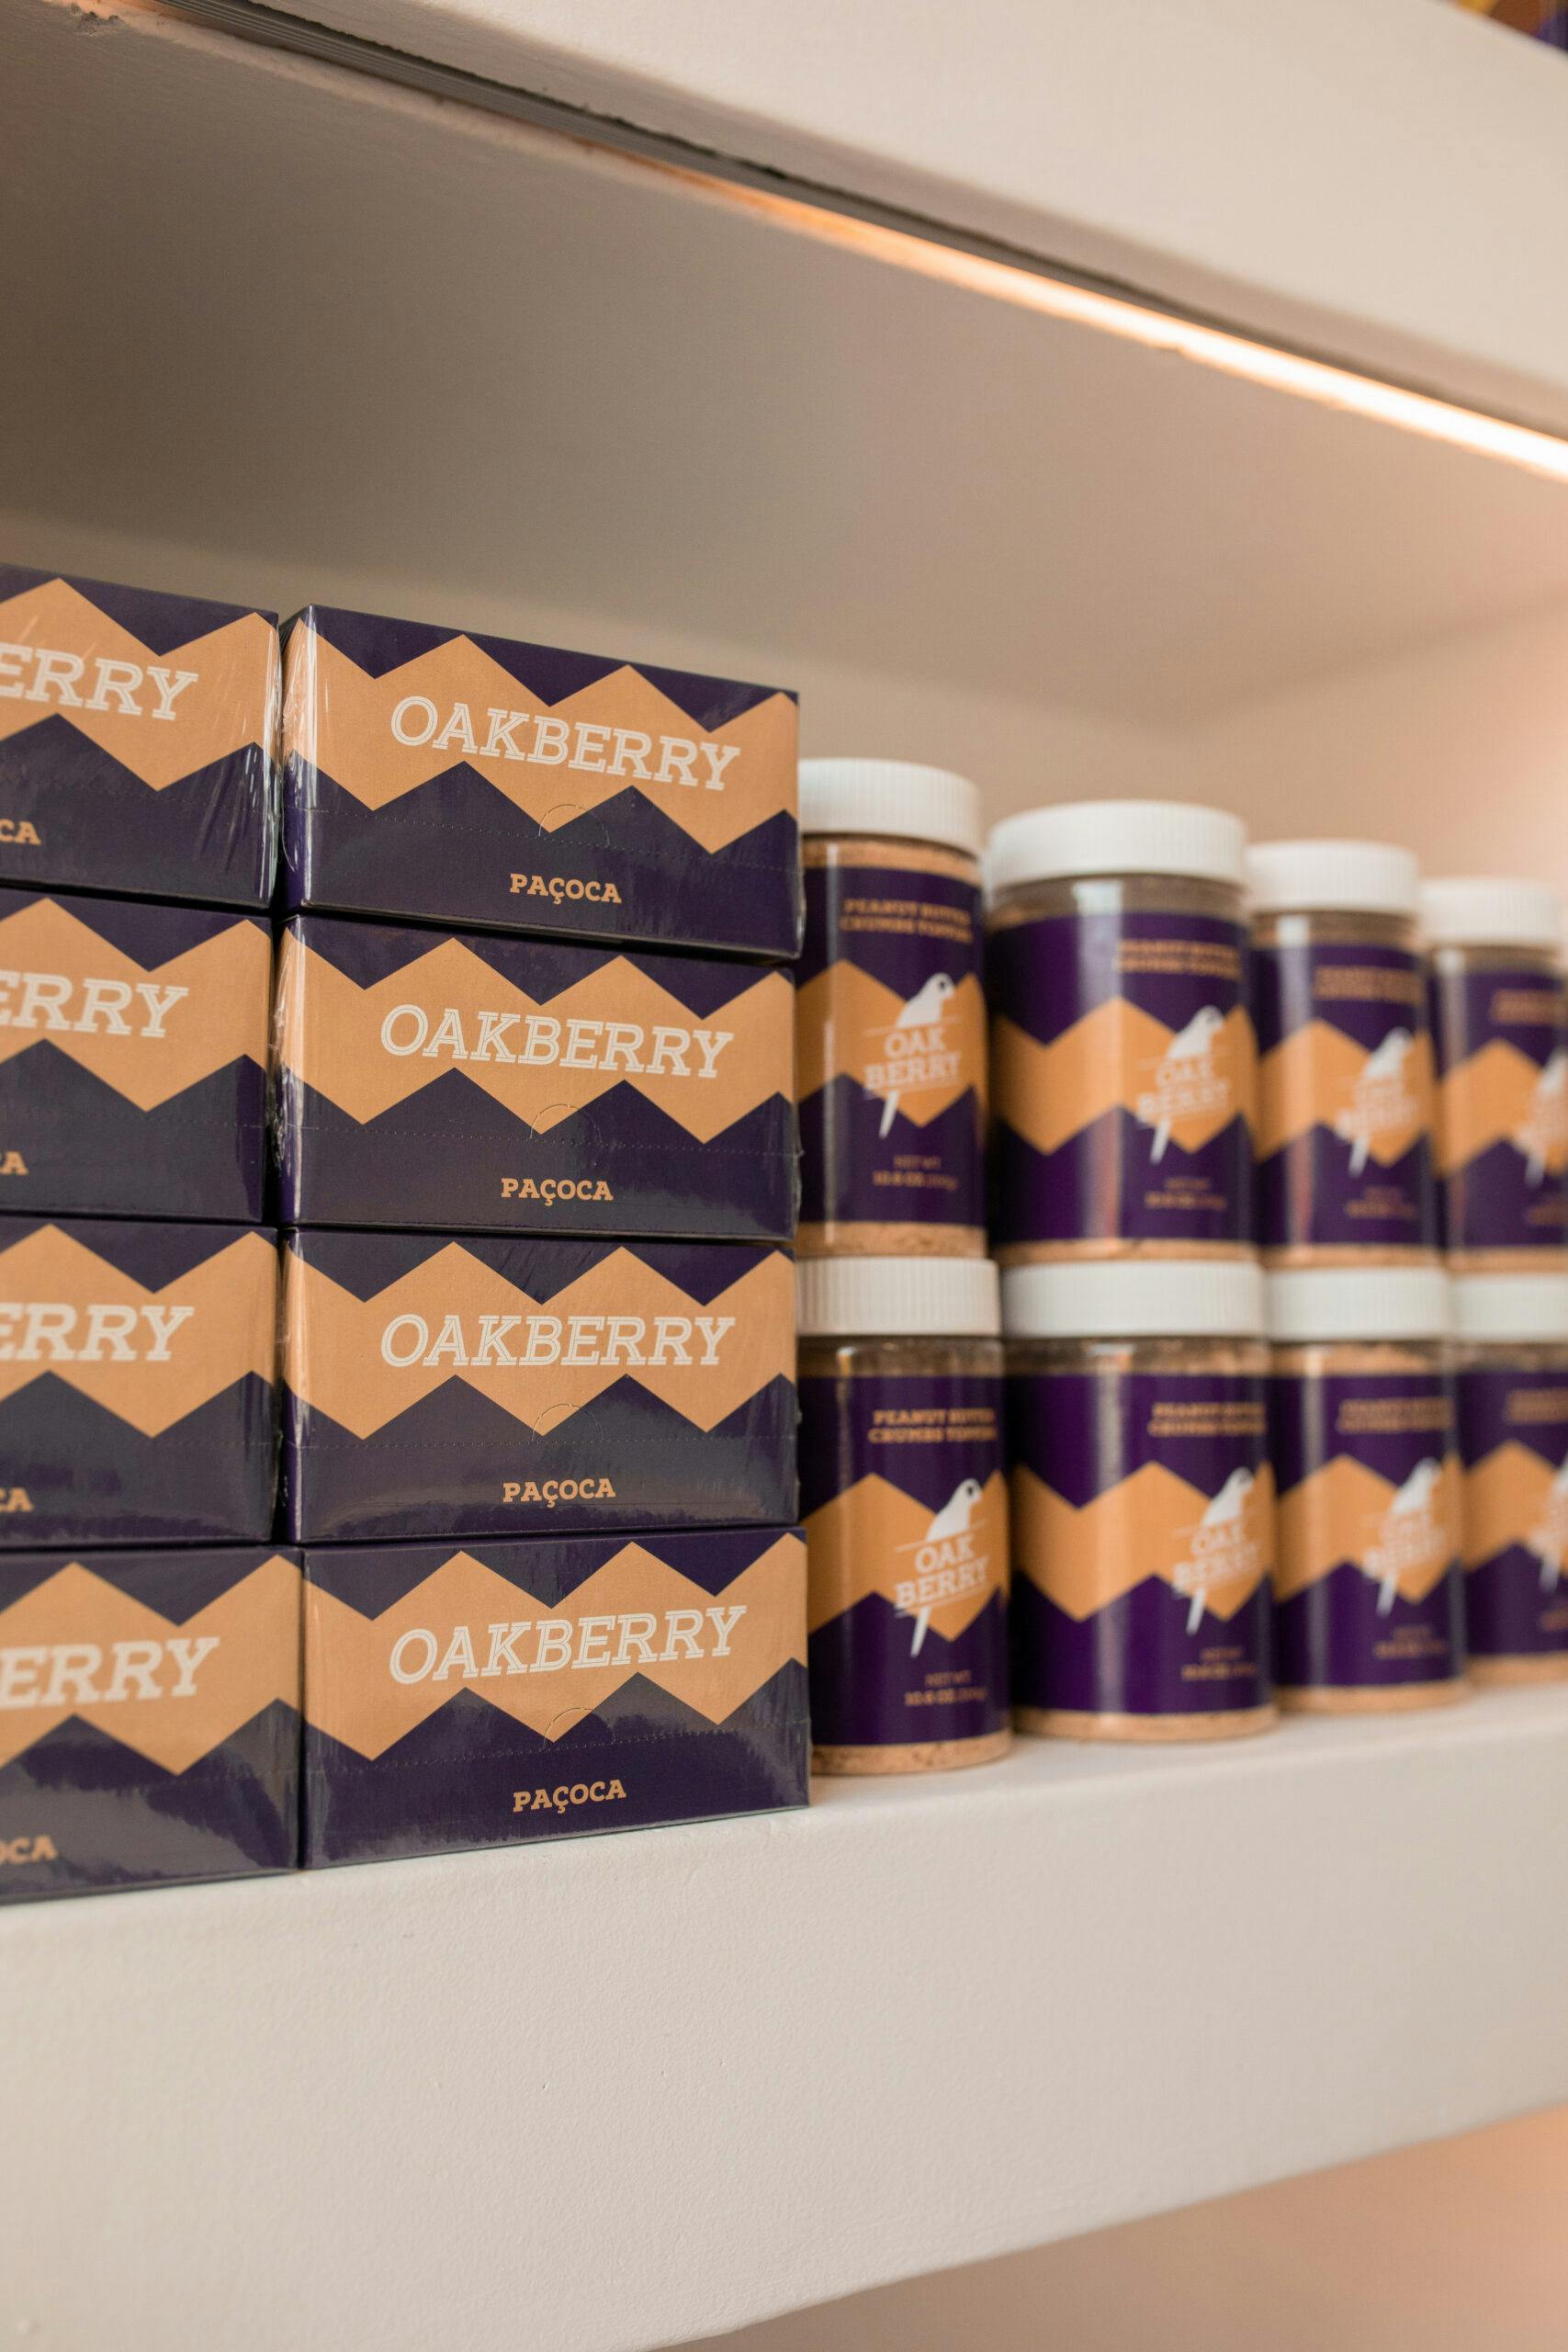 A shelf with boxes of OAKBERRY PB and OAKBERRY Paçoca